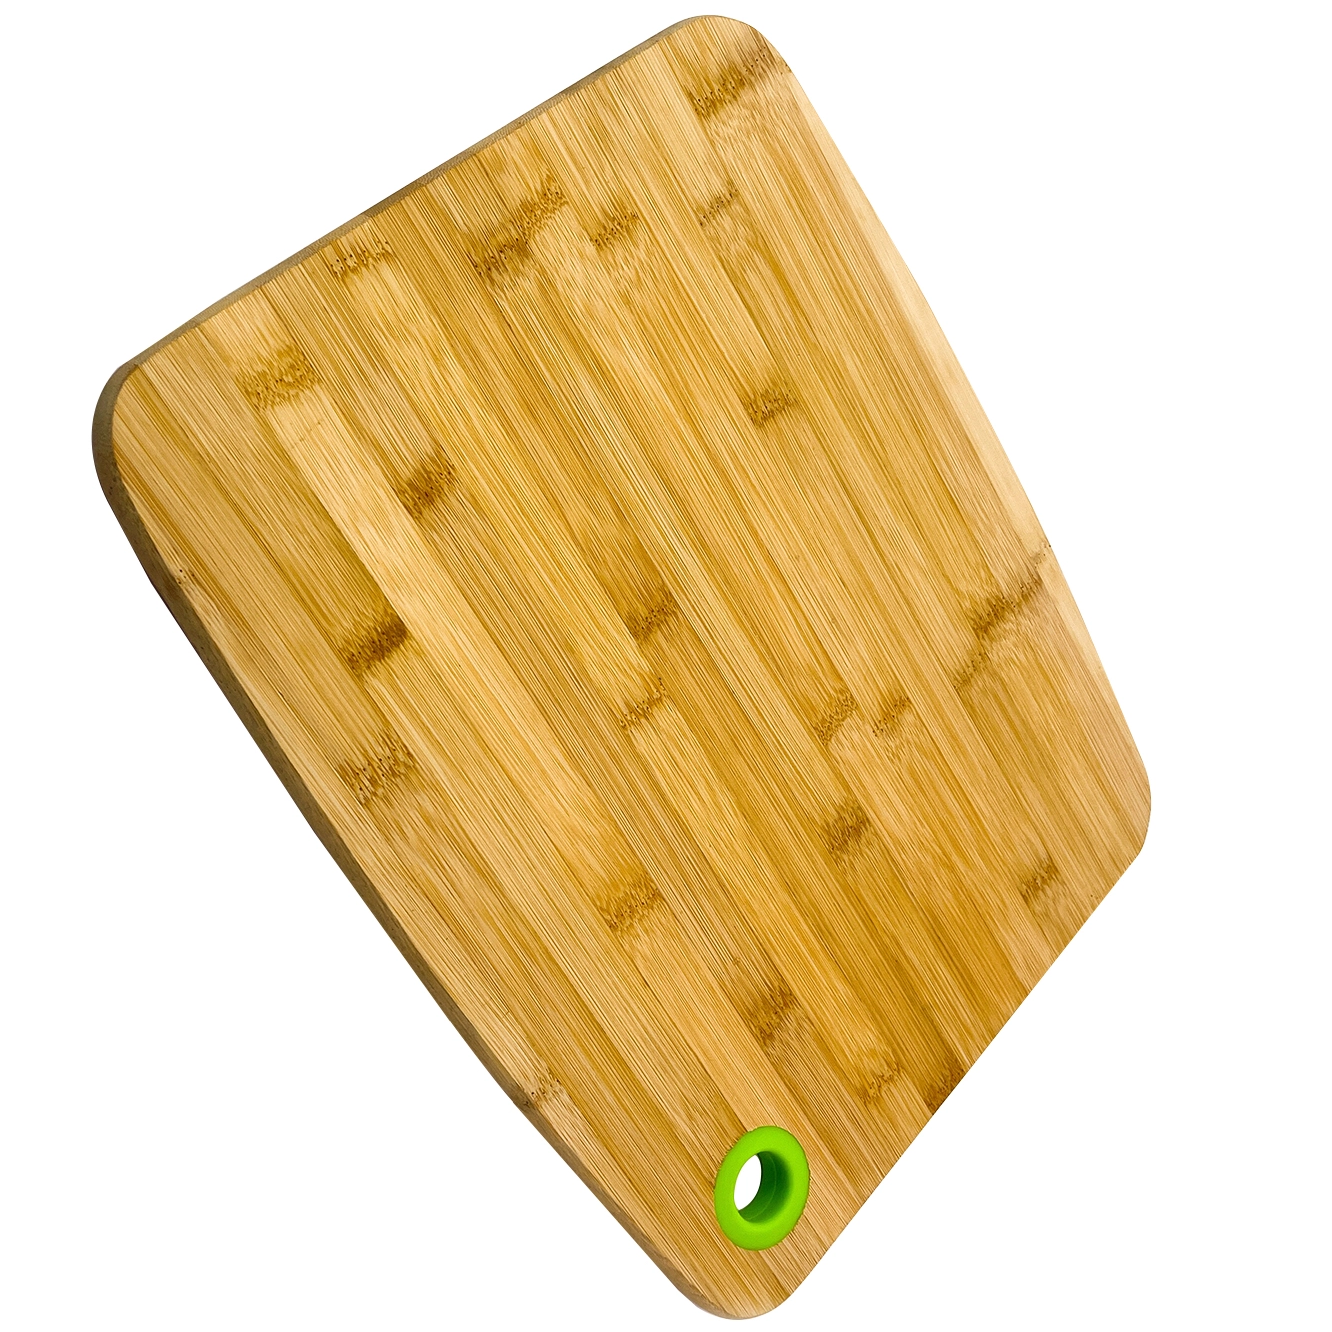 Natural Bamboo Wooden Chopping Block Cutting Board Mincing Board A Board Of Cutting for Kitchen for Wholesale